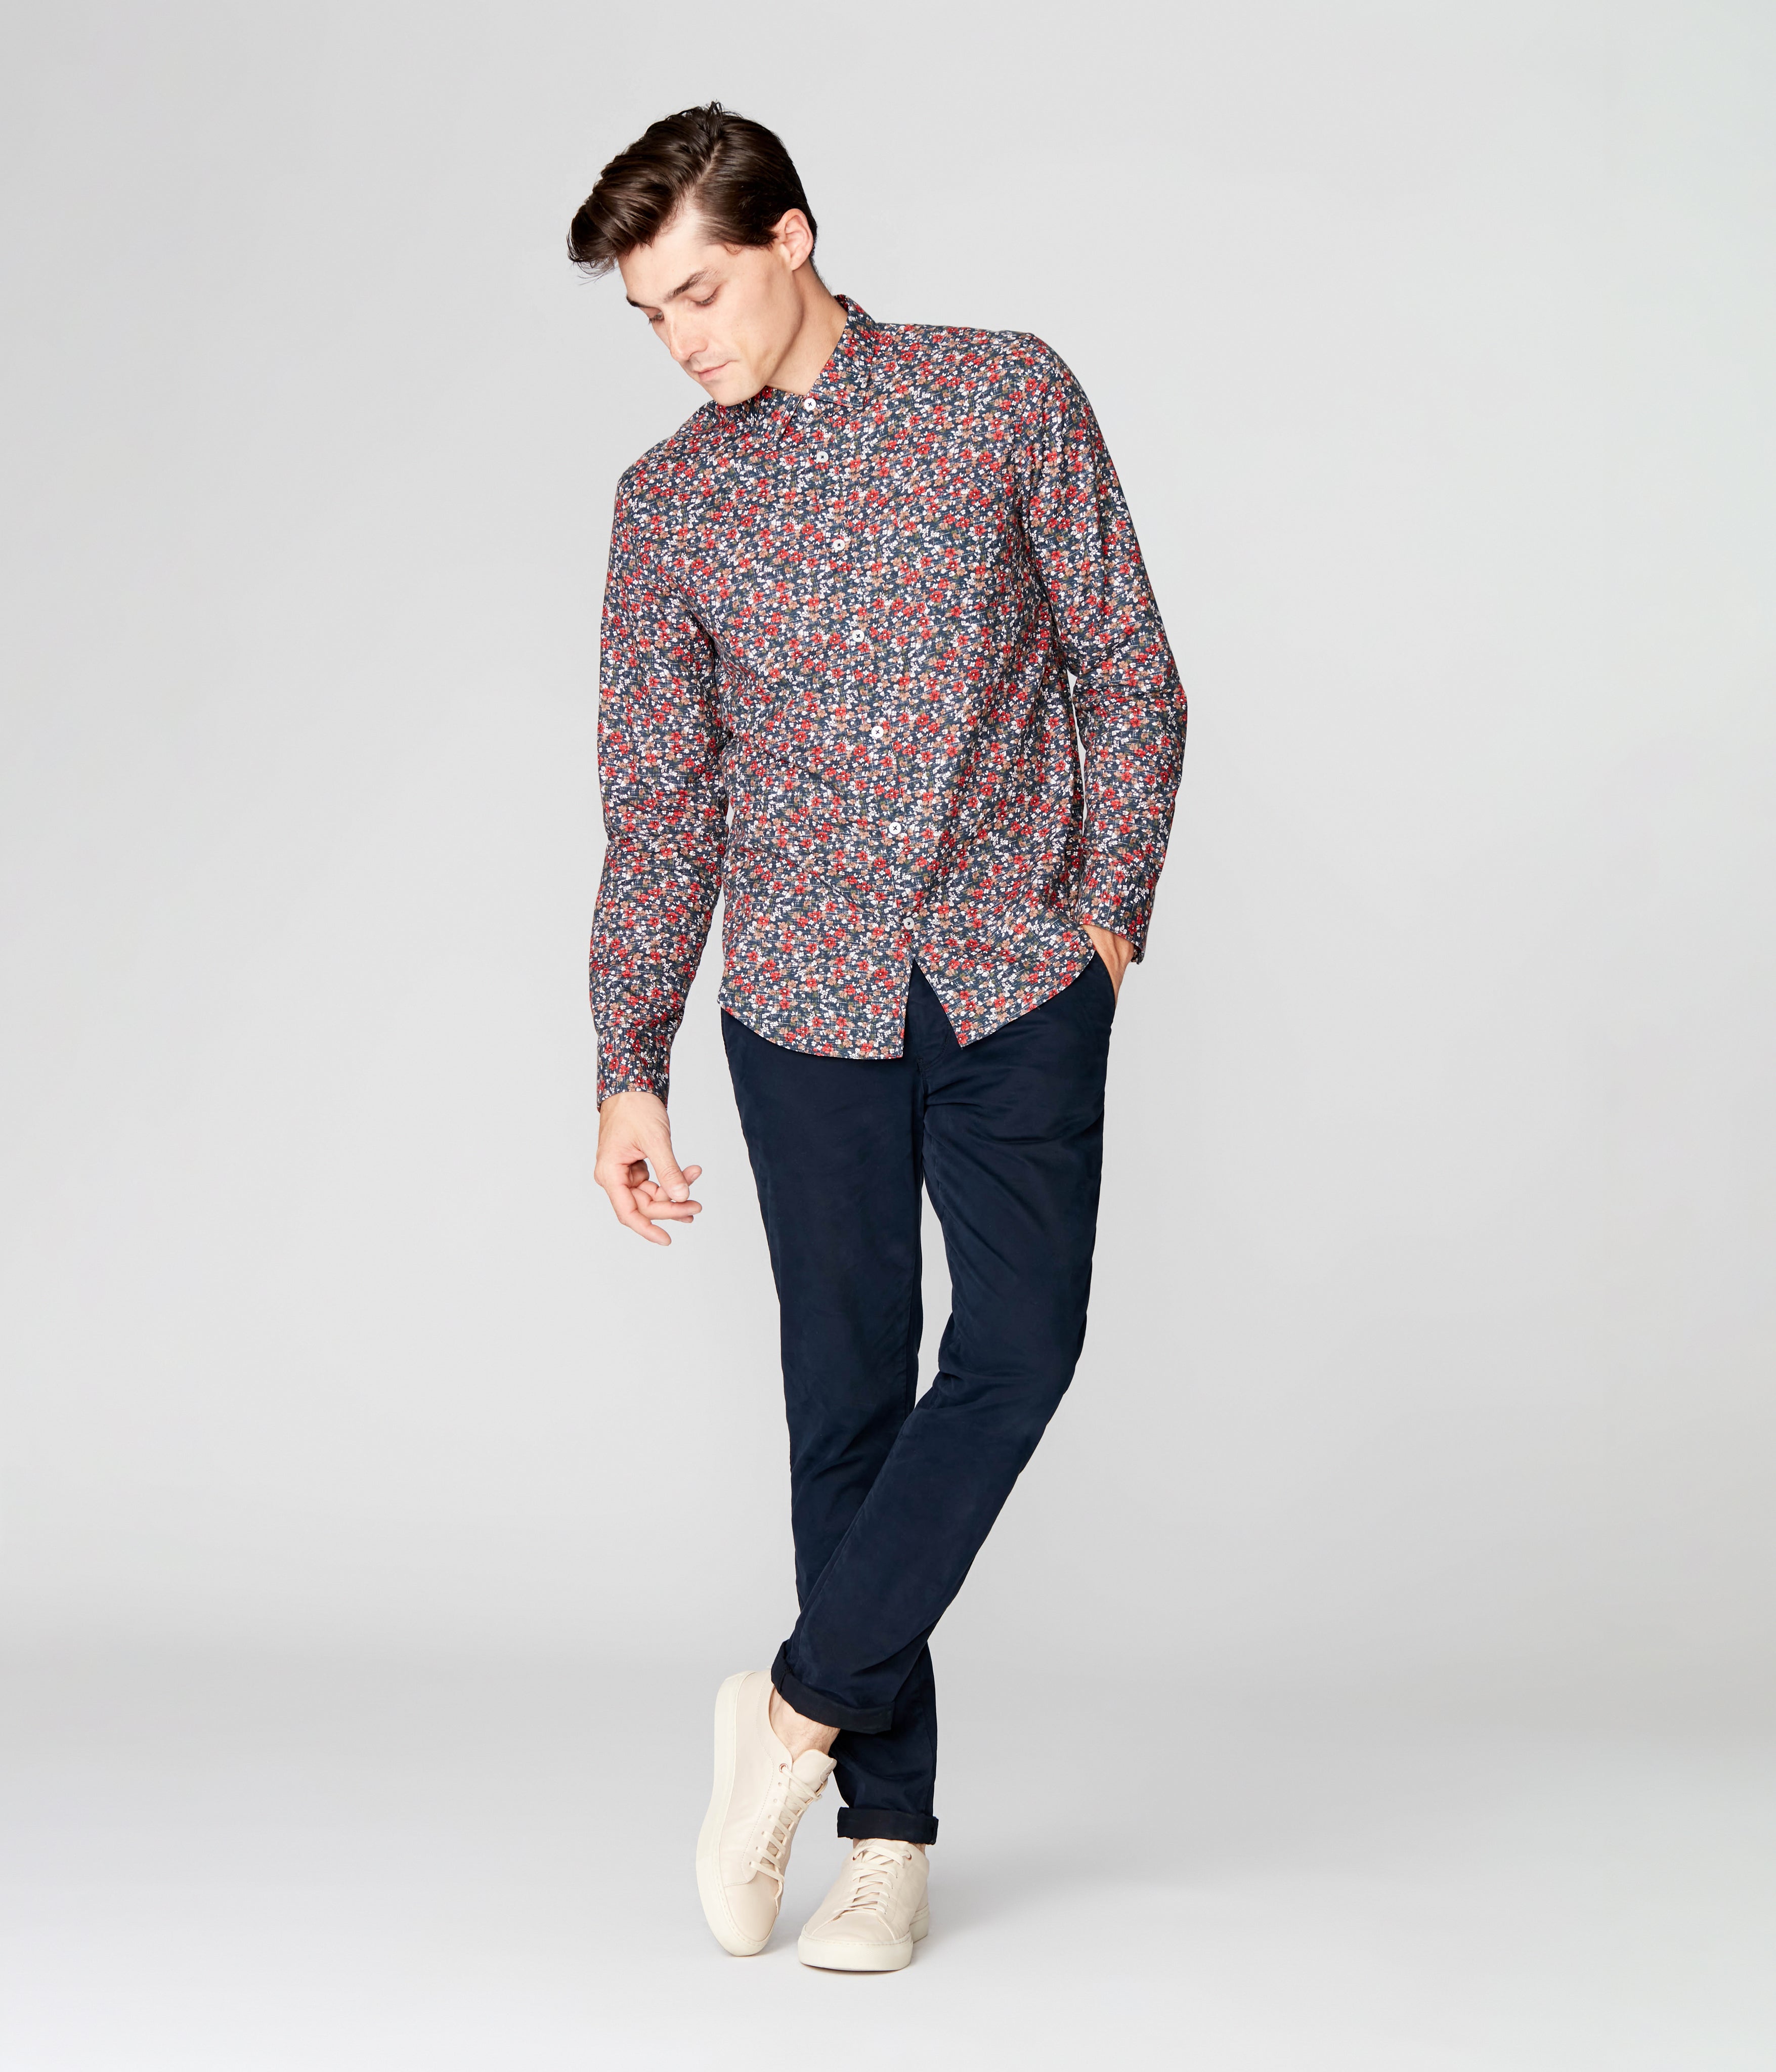 On-Point Print Shirt - Navy Luxembourg Floral